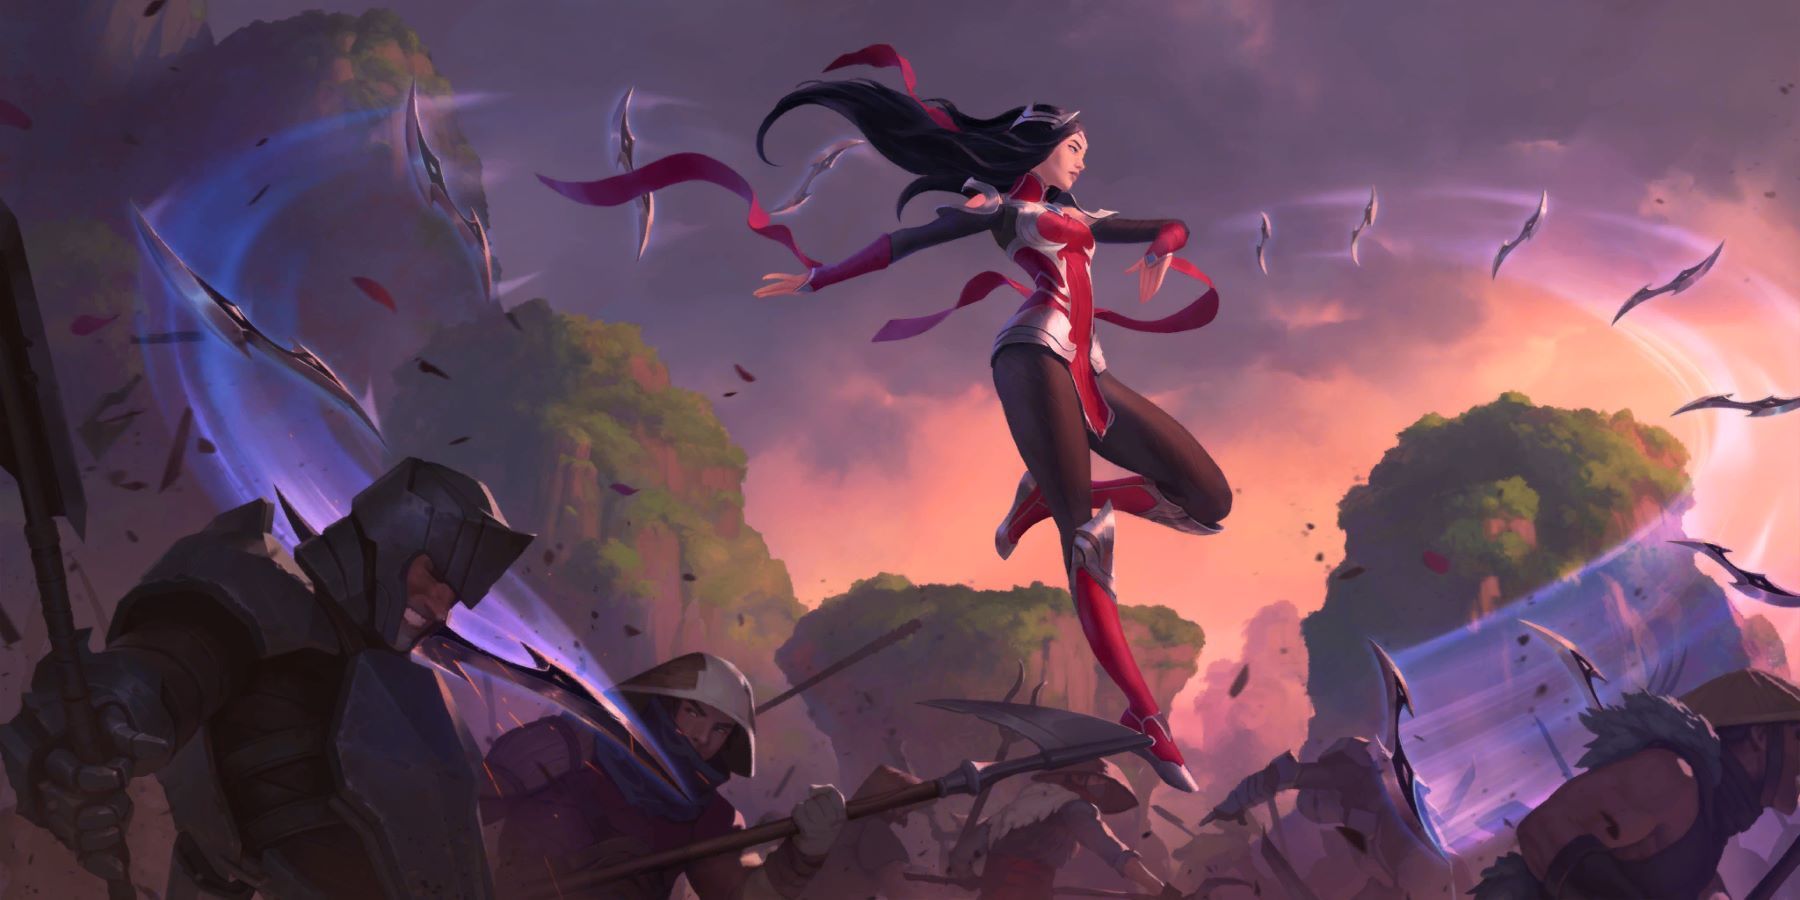 Irelia leaping into battle and attacking Noxian soldiers with her flying blades in her Legends of Runeterra card art